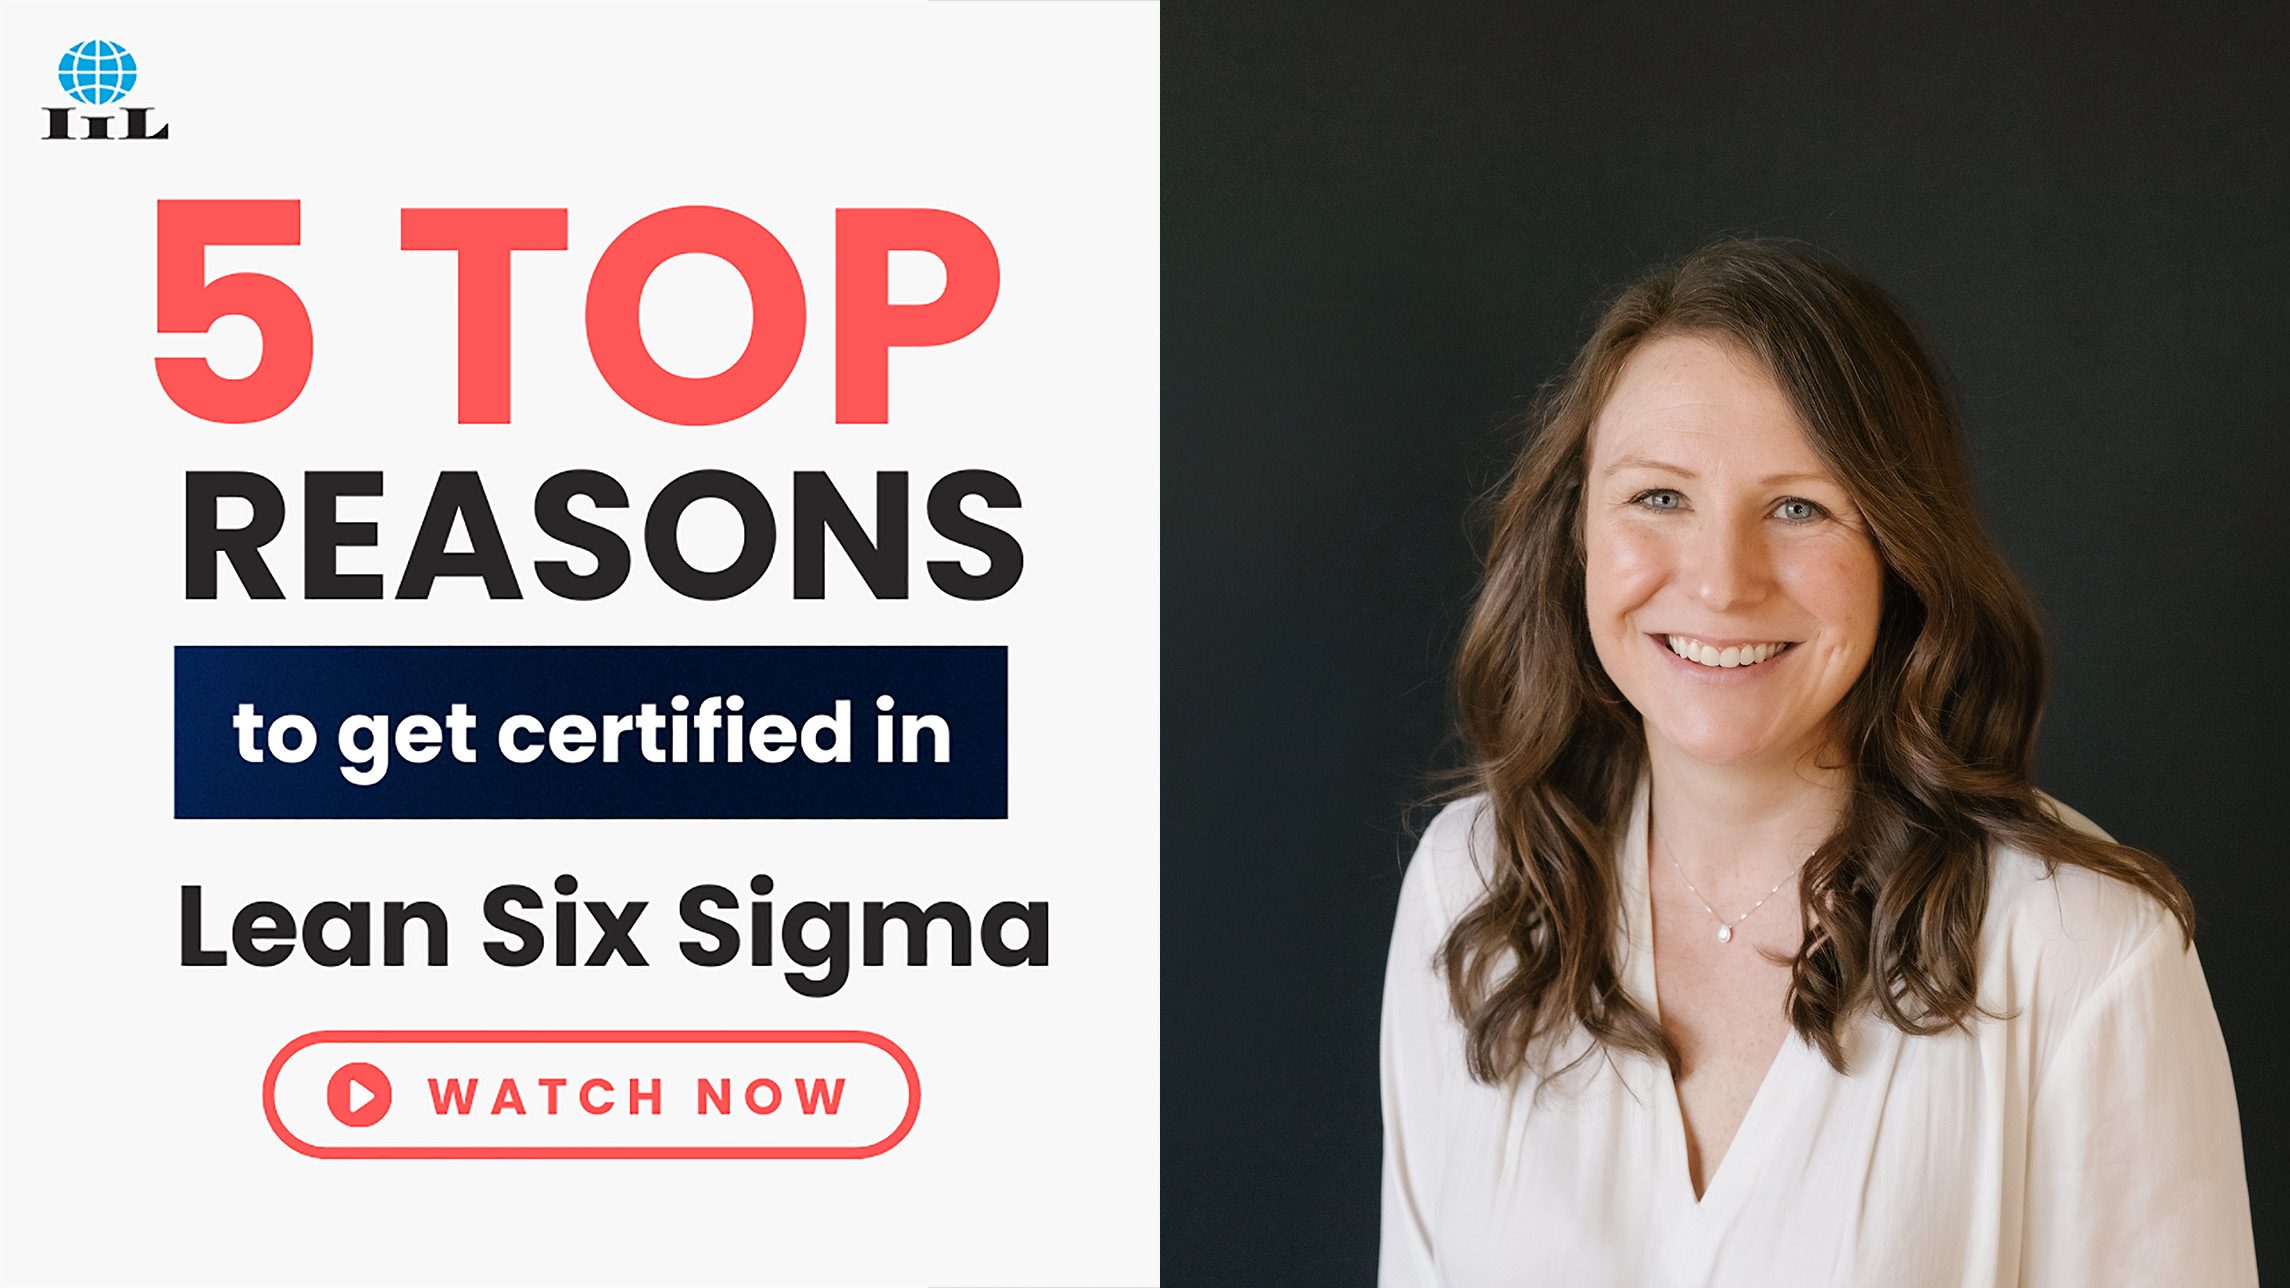 Top 5 Reasons to get certified in Lean Six Sigma